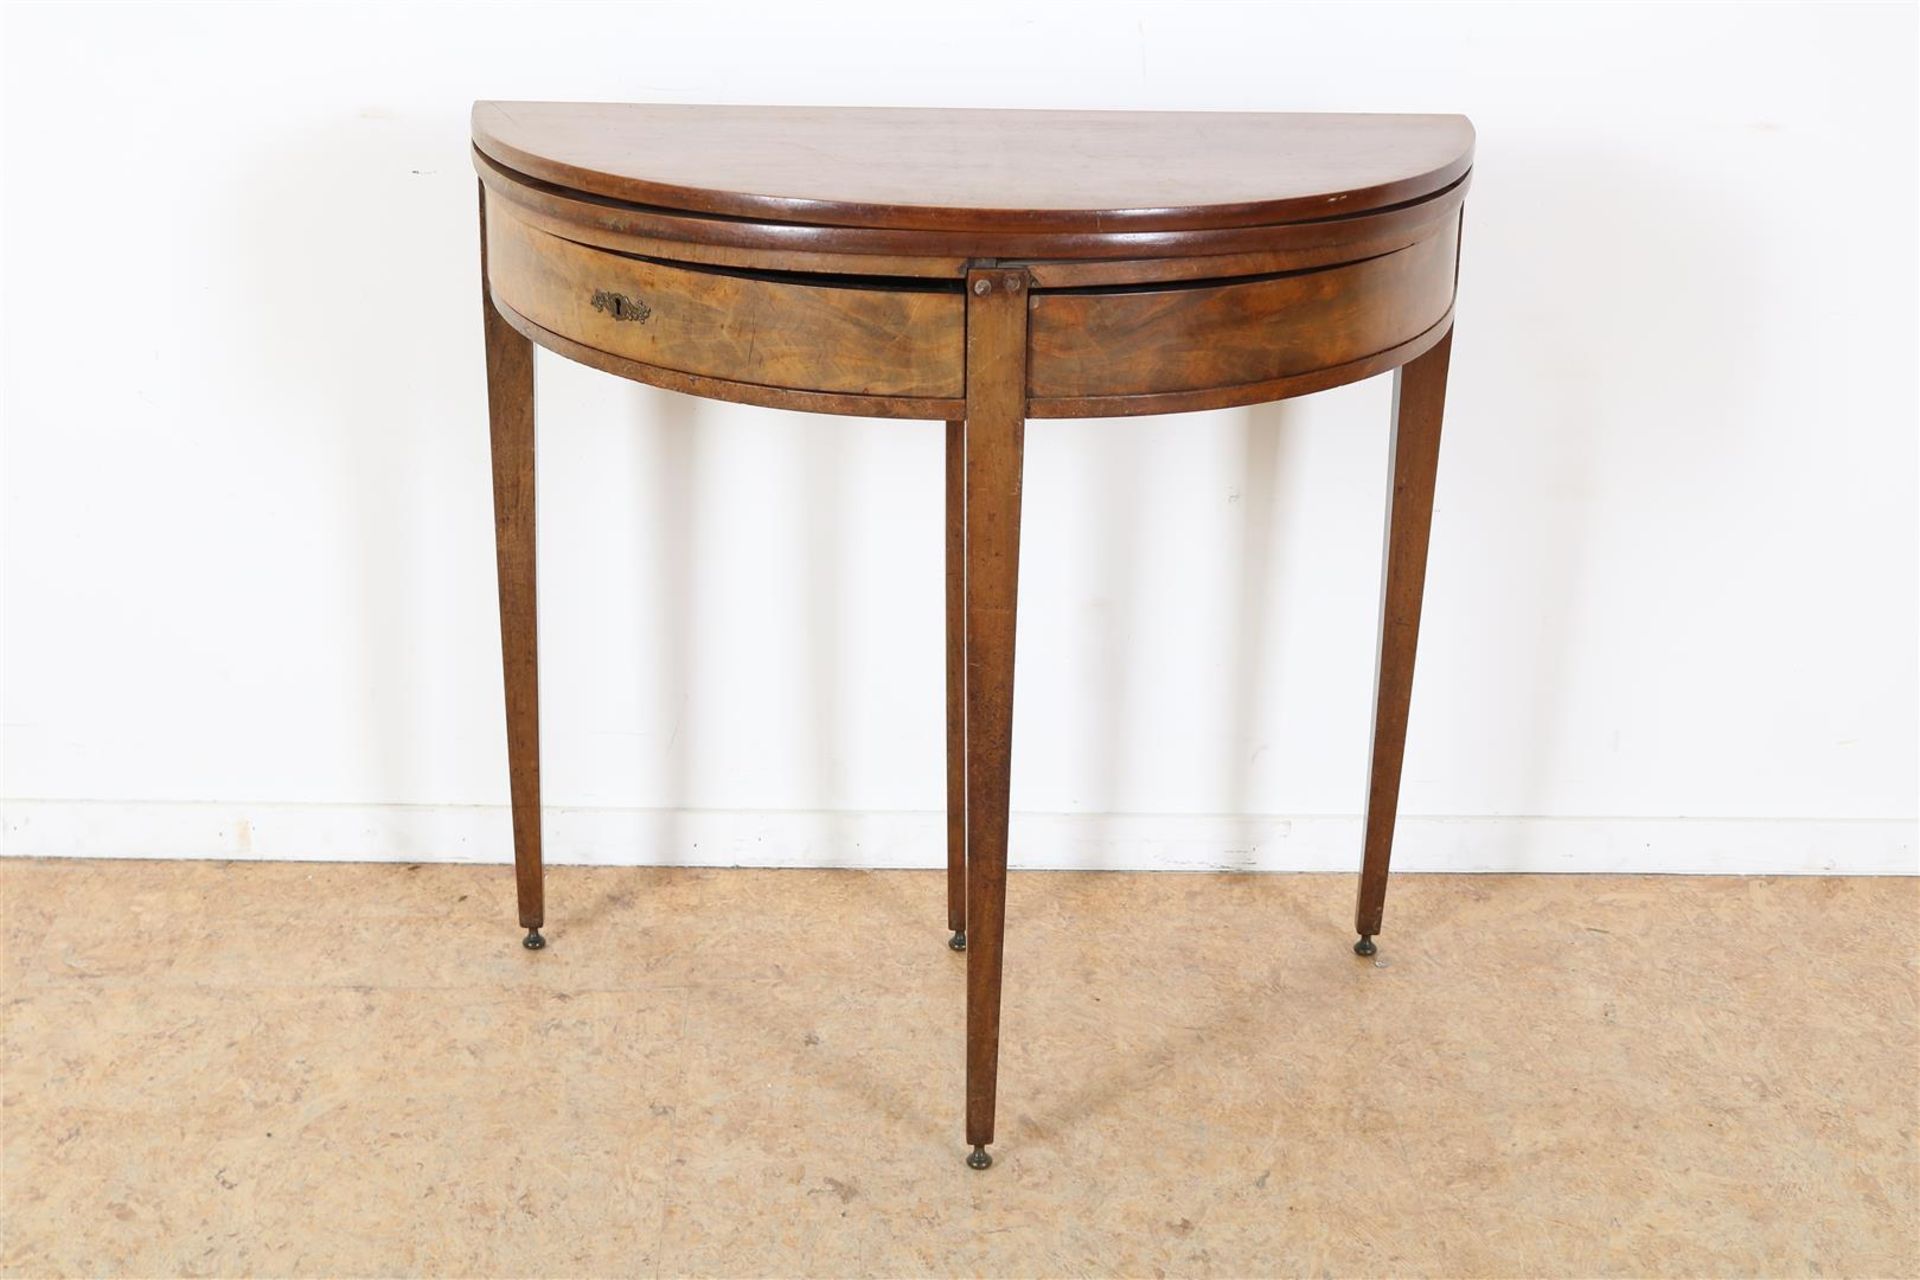 Mahogany Louis XVI style console table with 2 drawers on tapered legs, 19th century, 78 x 82 x 42